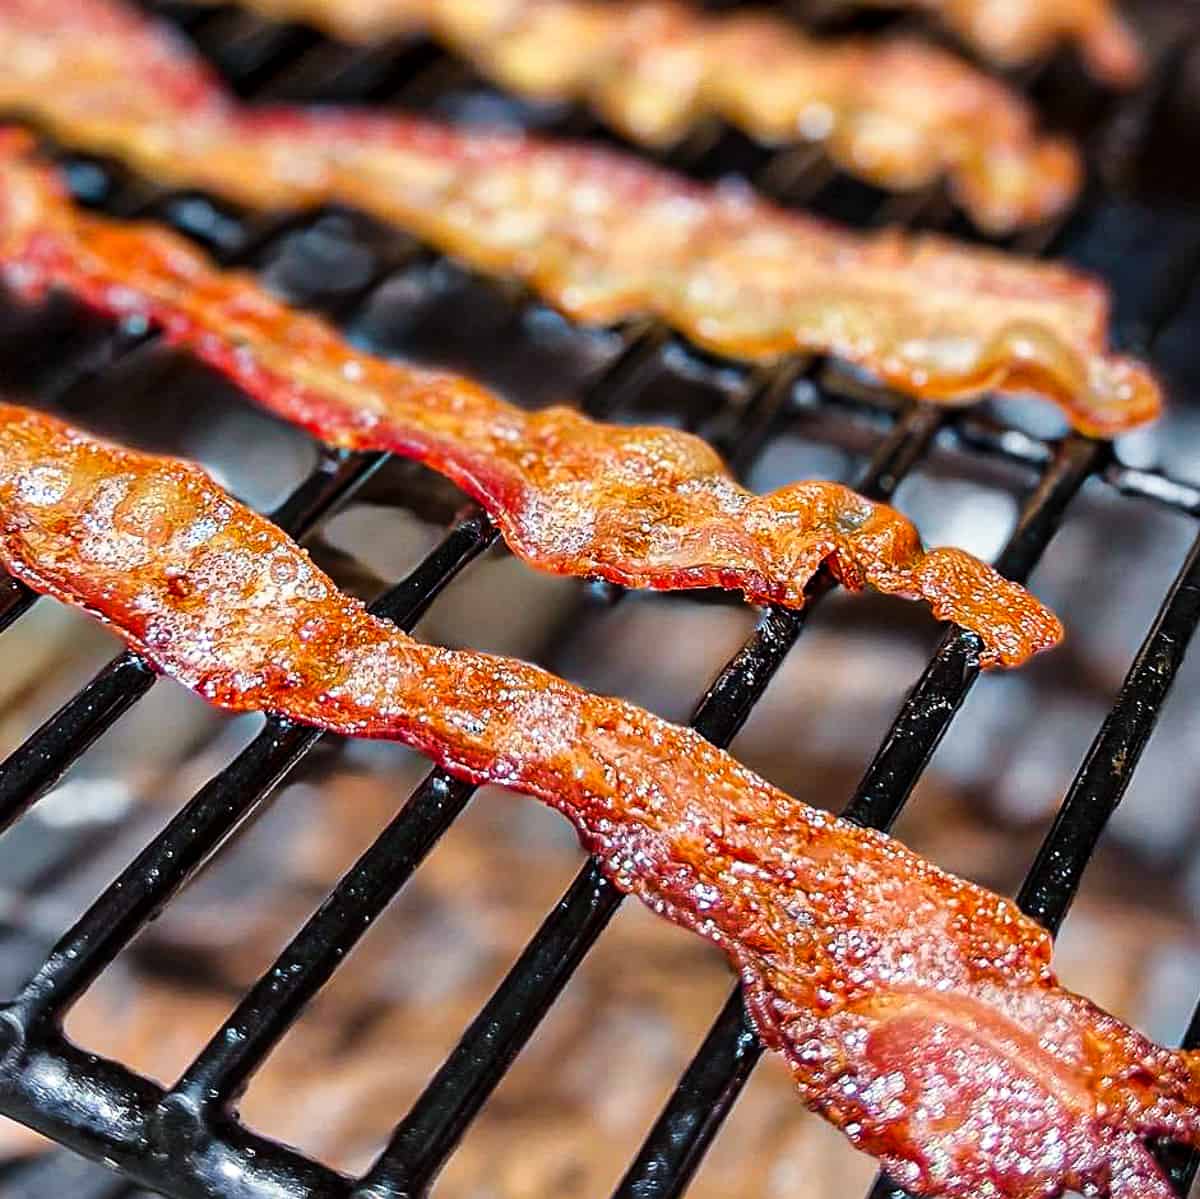 Cooking Traeger Smoked Bacon on Pellet Grill Grates